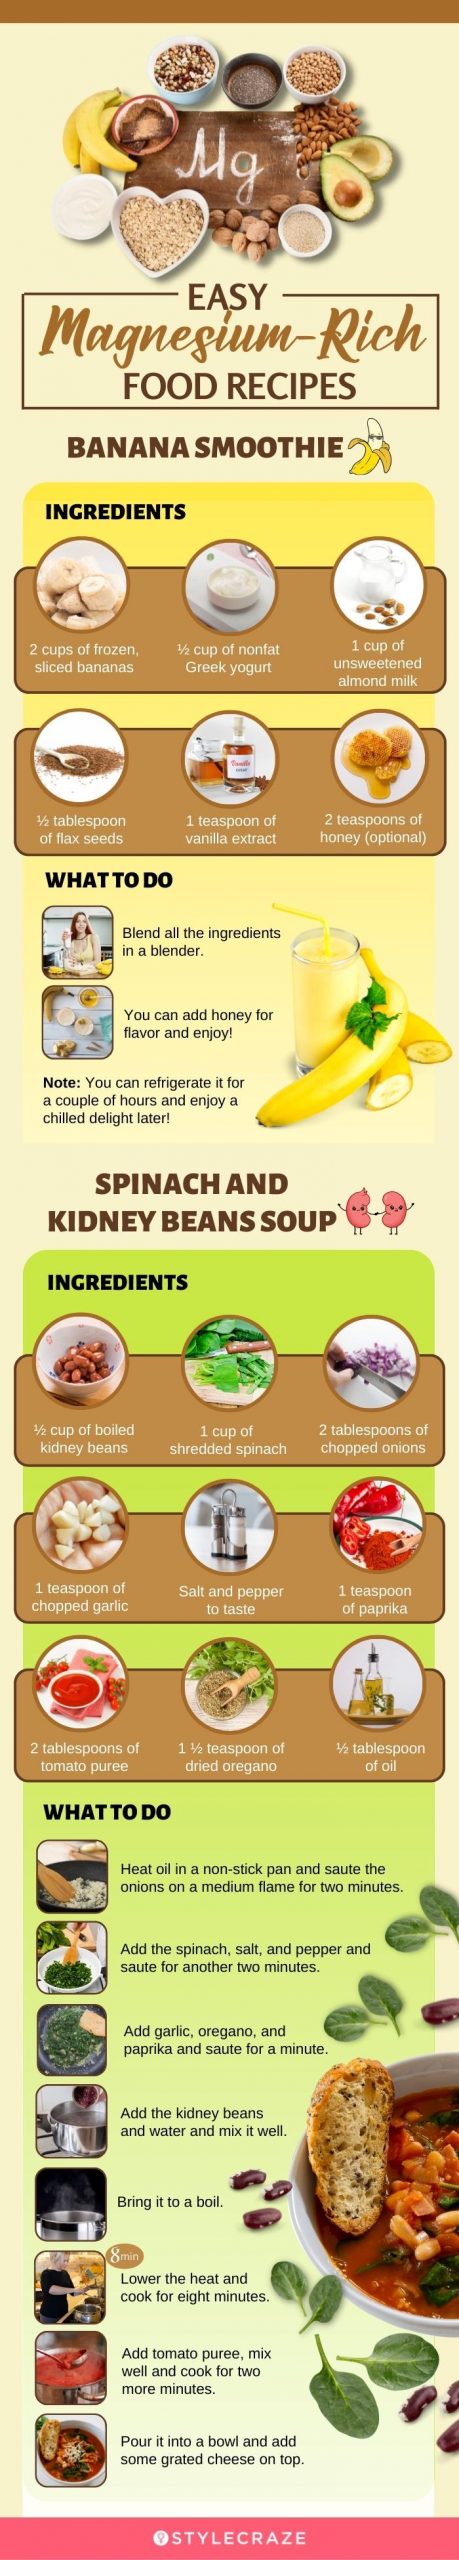 easy magnesium rich food recipes [infographic]